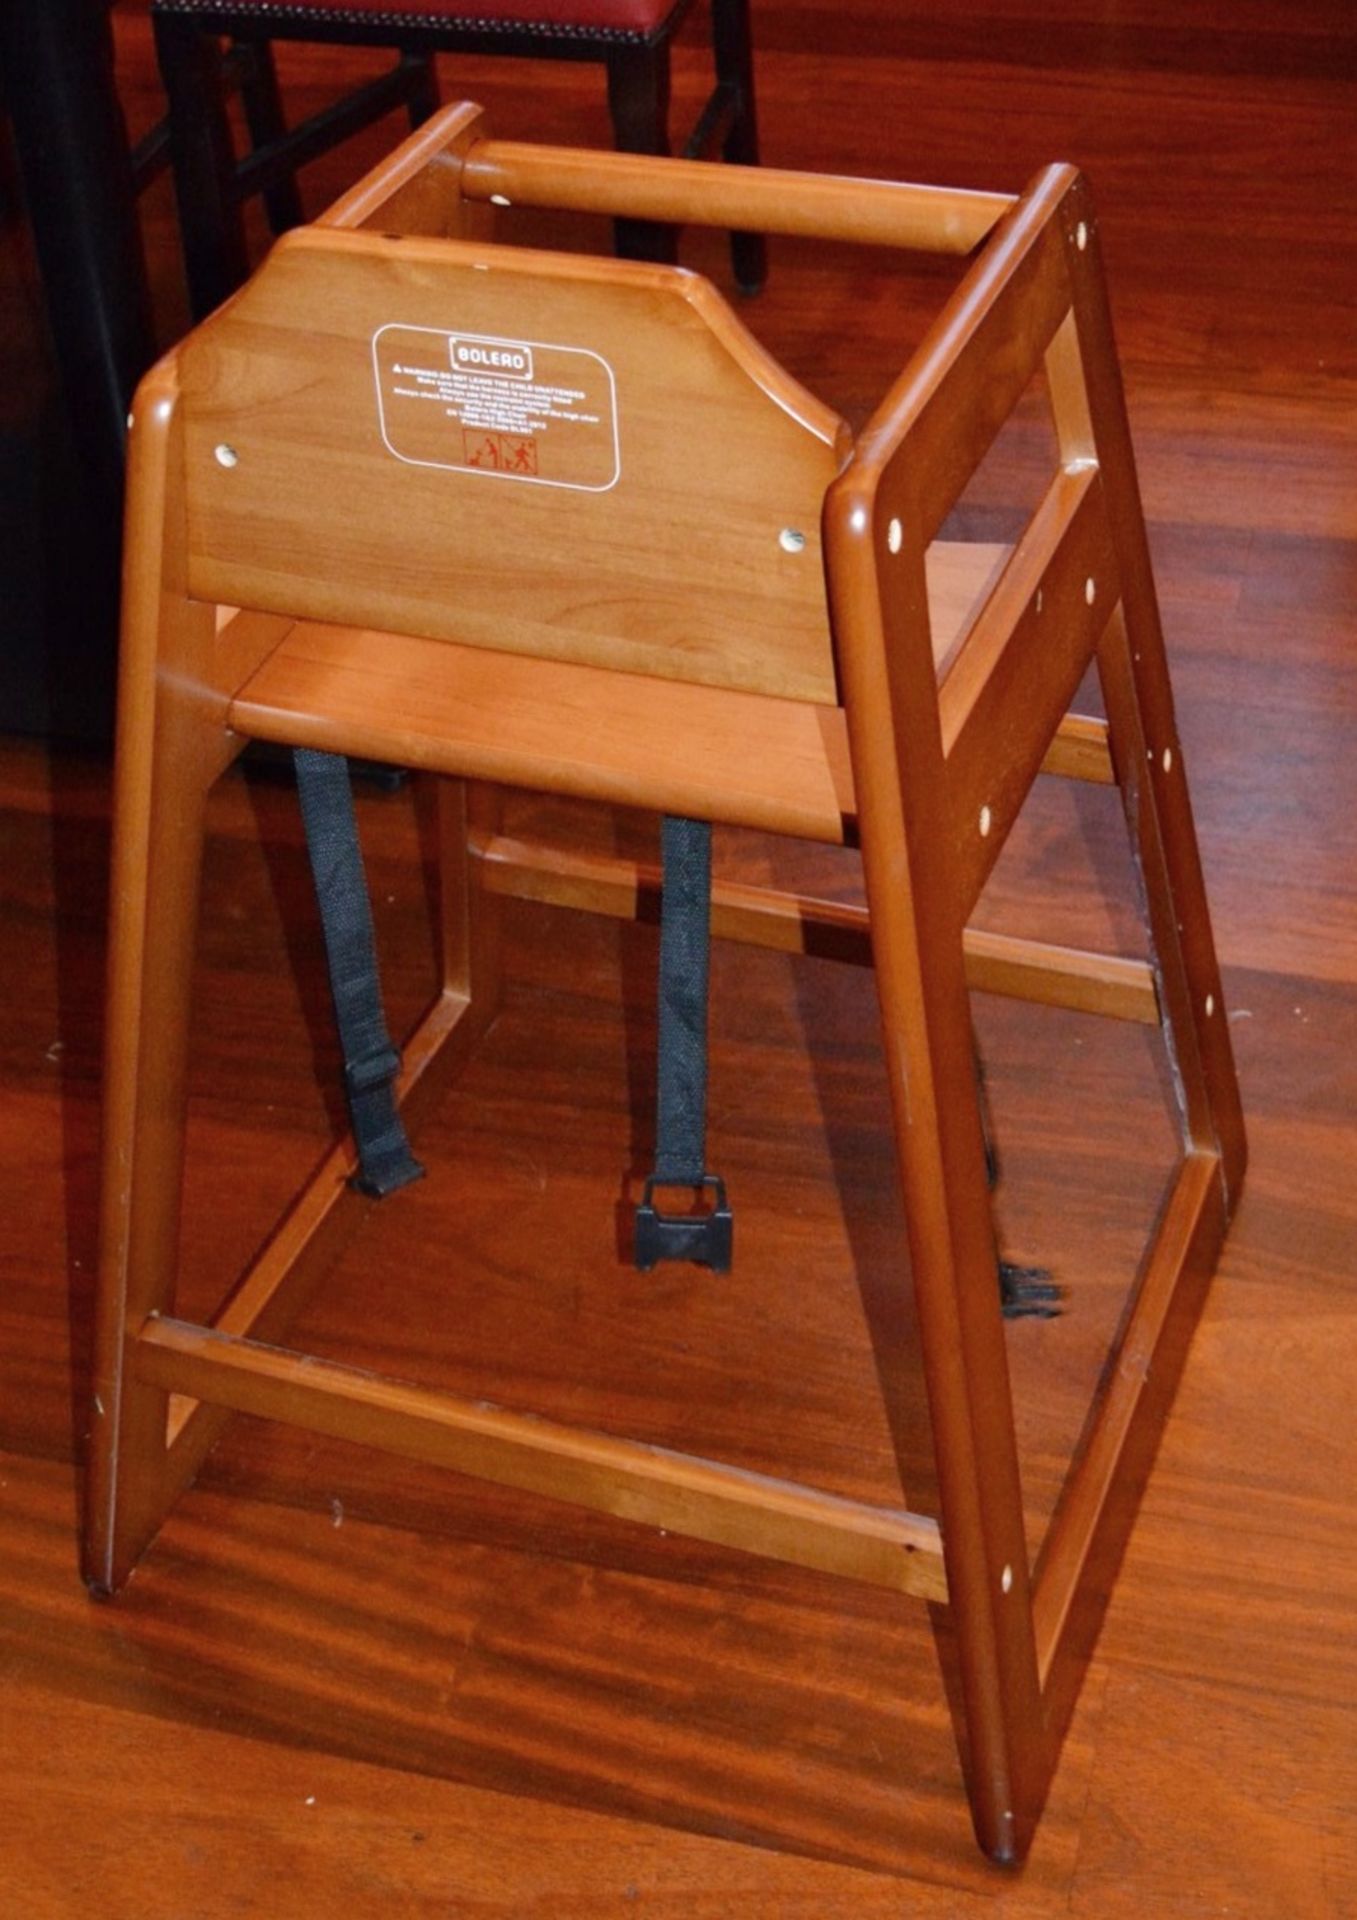 4 x Childs High Chairs - CL353 - Image 2 of 4